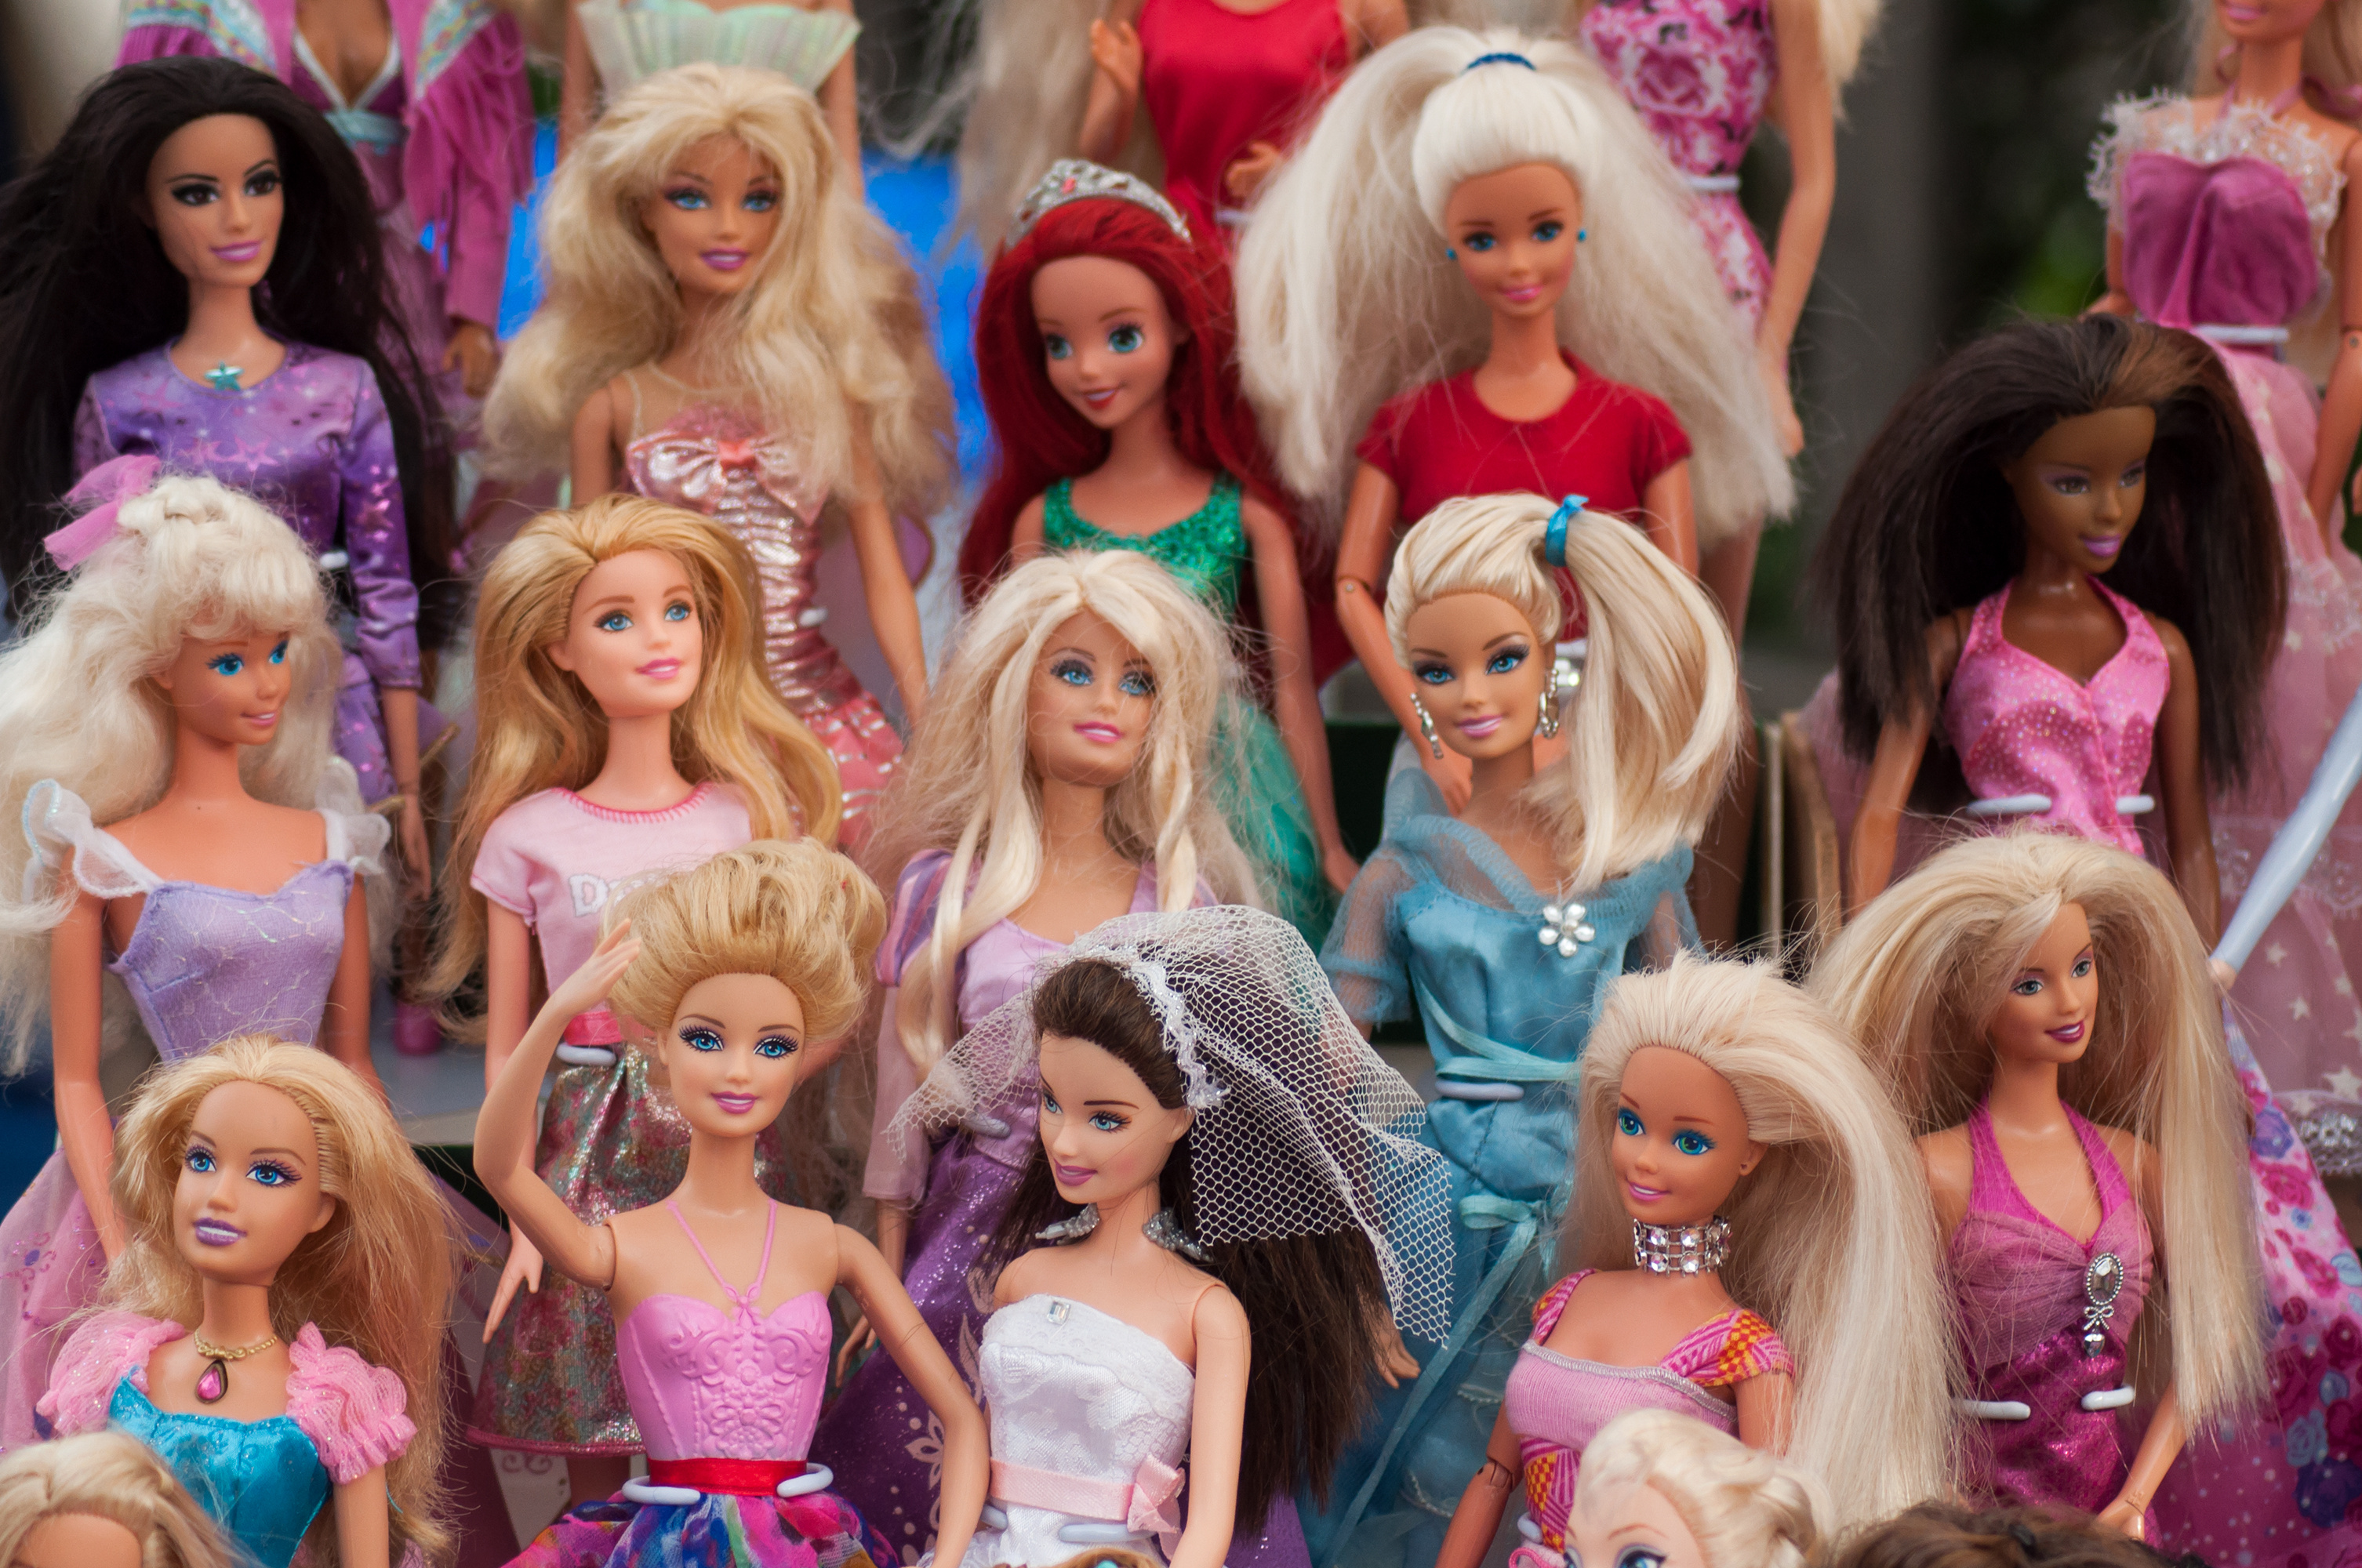 Collage of various Barbie dolls and their accessories